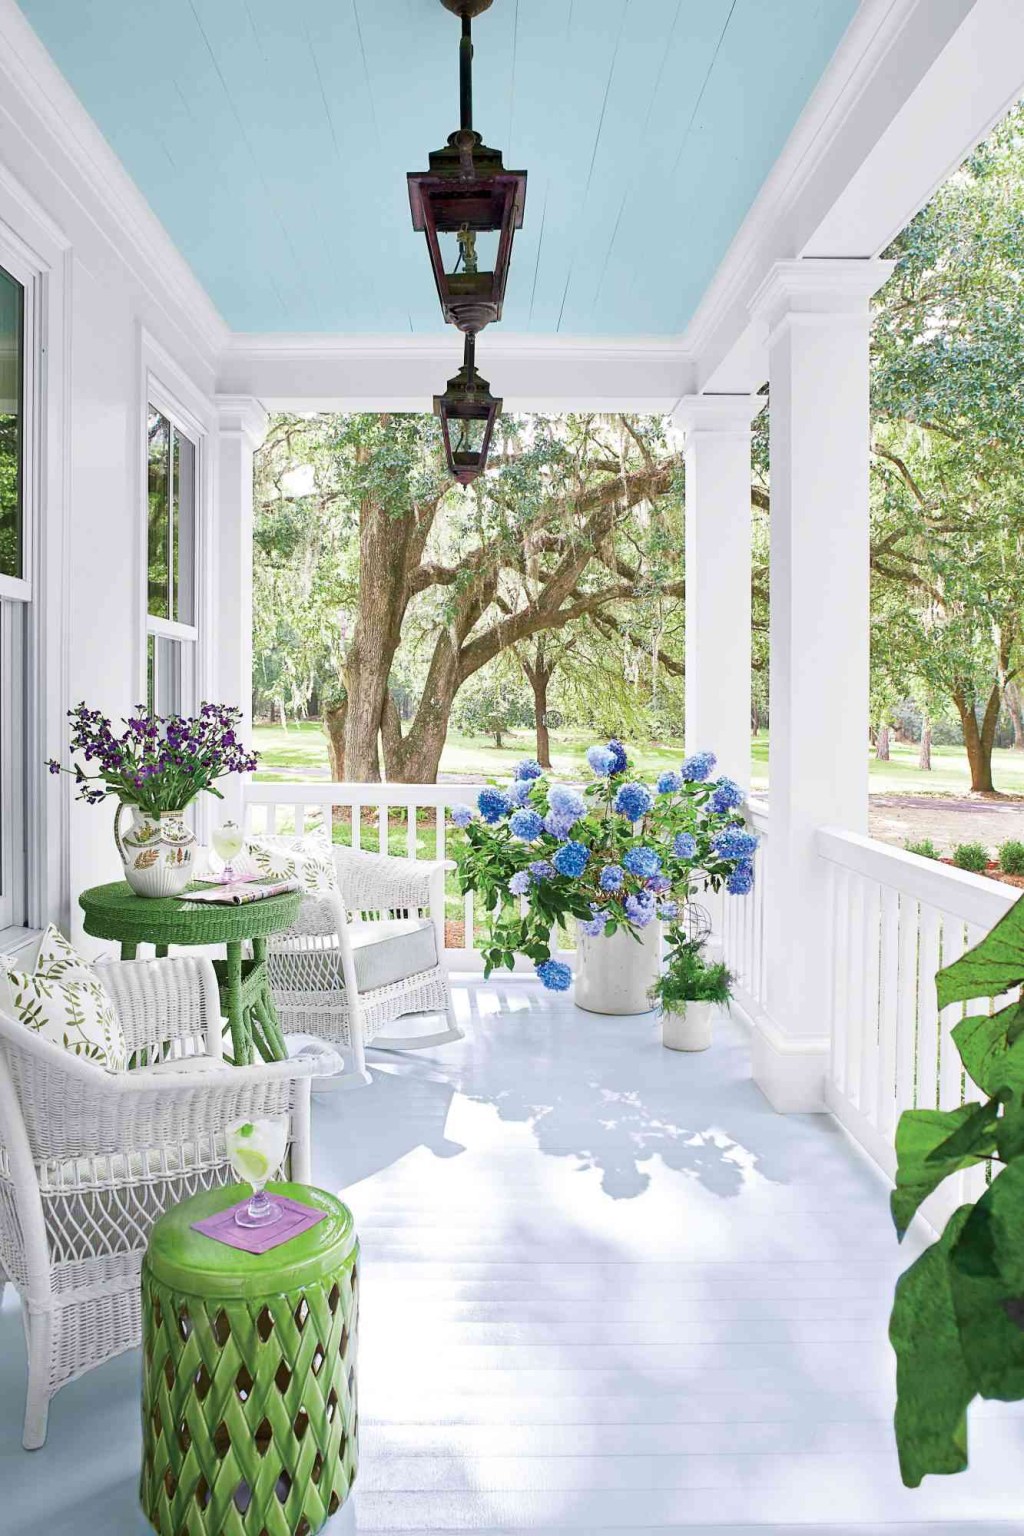 Picture of: This Is The Perfect Haint Blue For Your Porch, According To Our